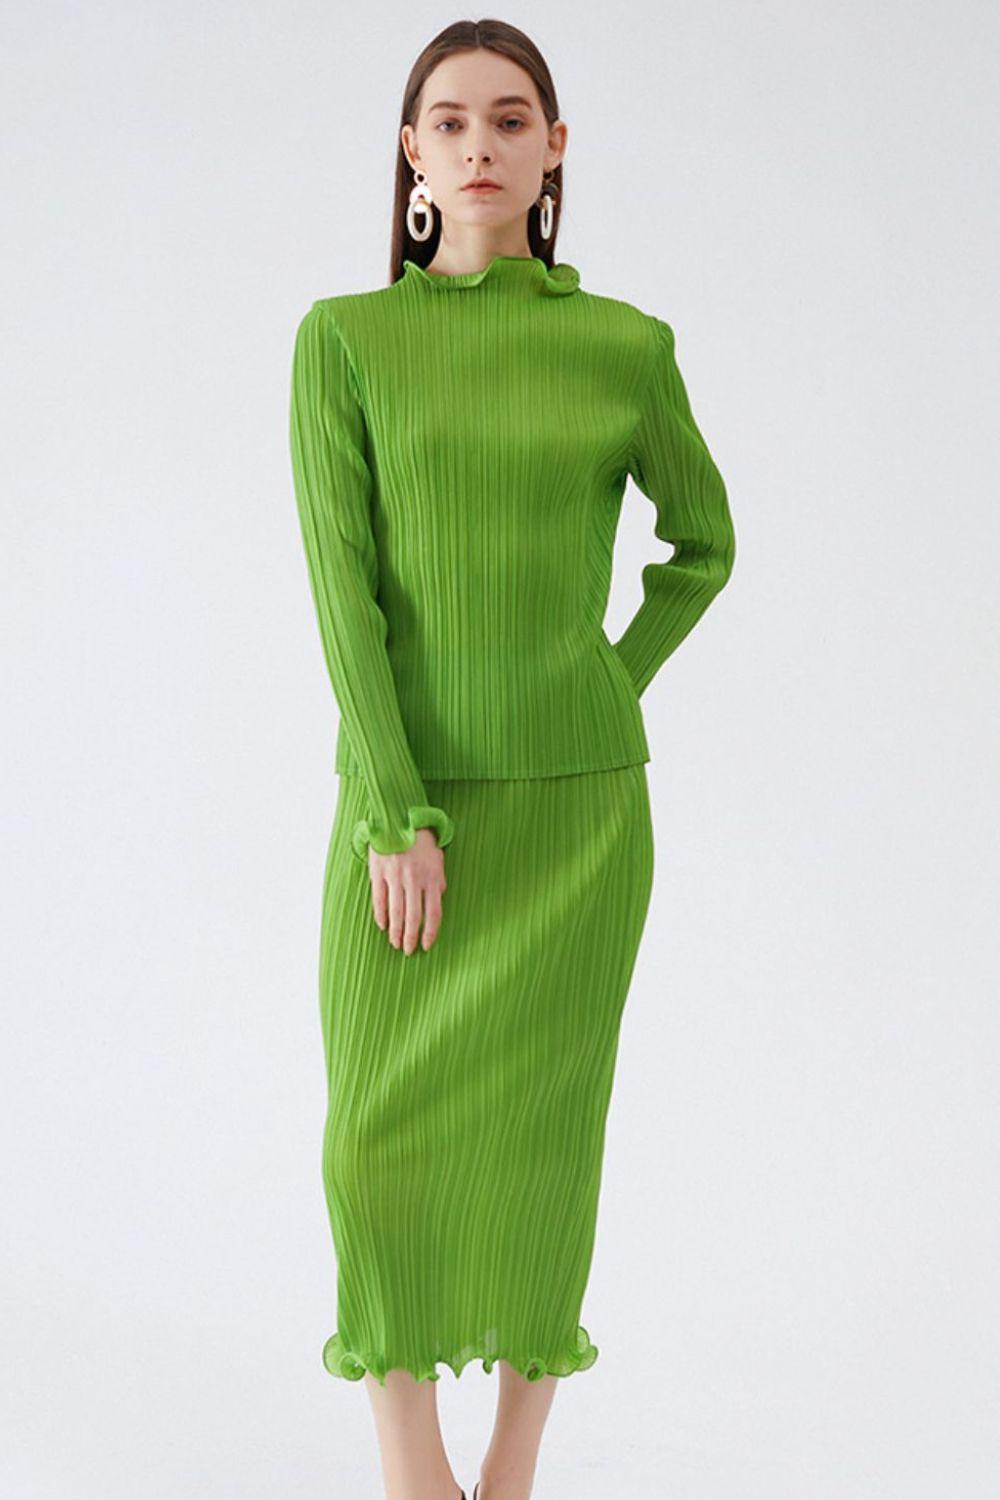 Lettuce Trim Accordion Pleated Top and Skirt Set - Rico Goods by Rico Suarez